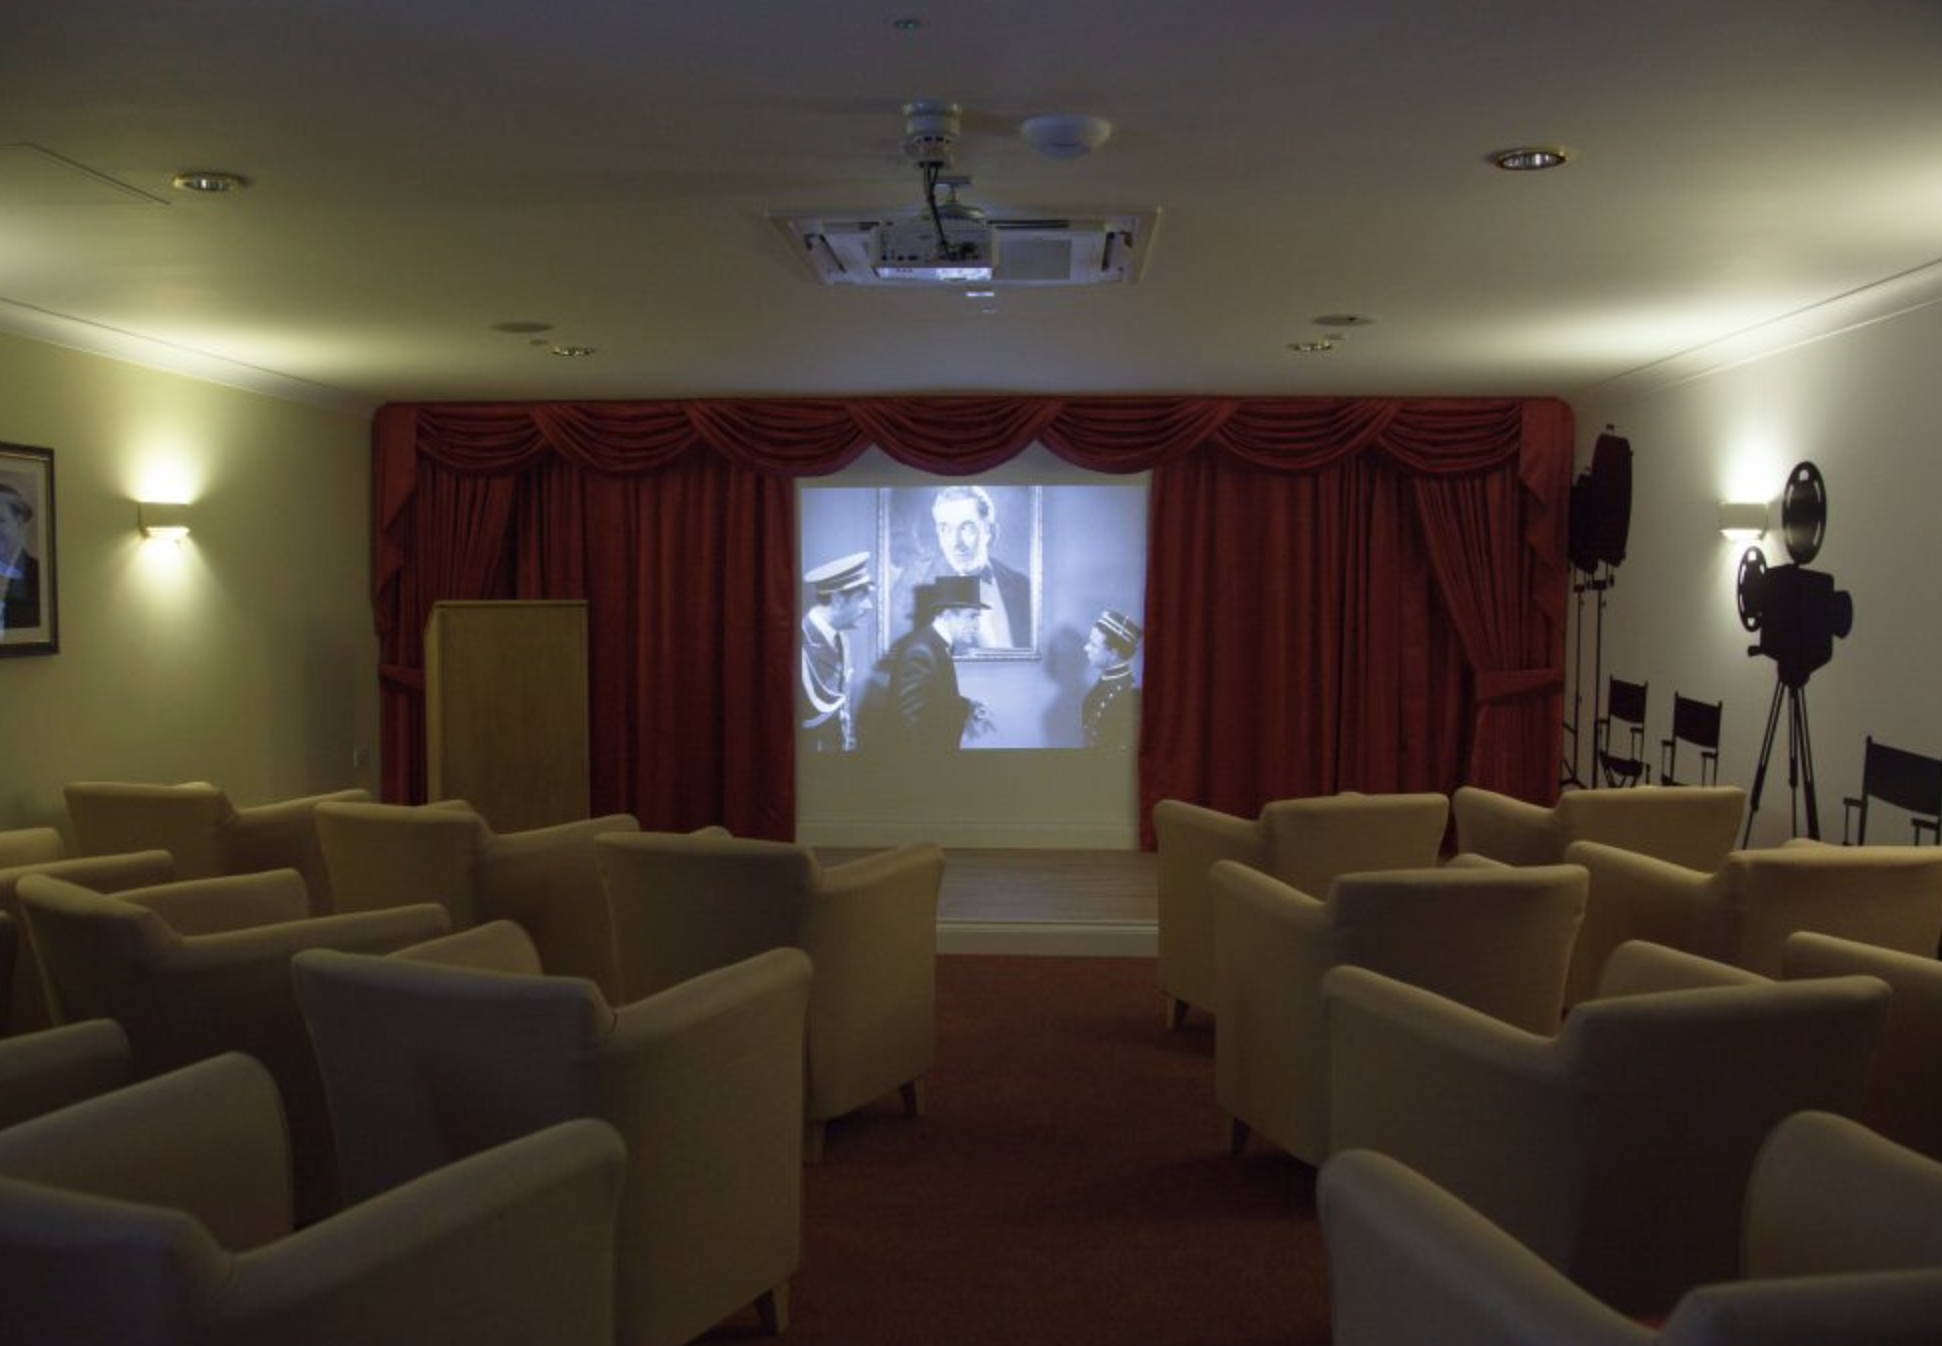 Cinema of Cooperscroft care home in Potters Bar, Hertfordshire